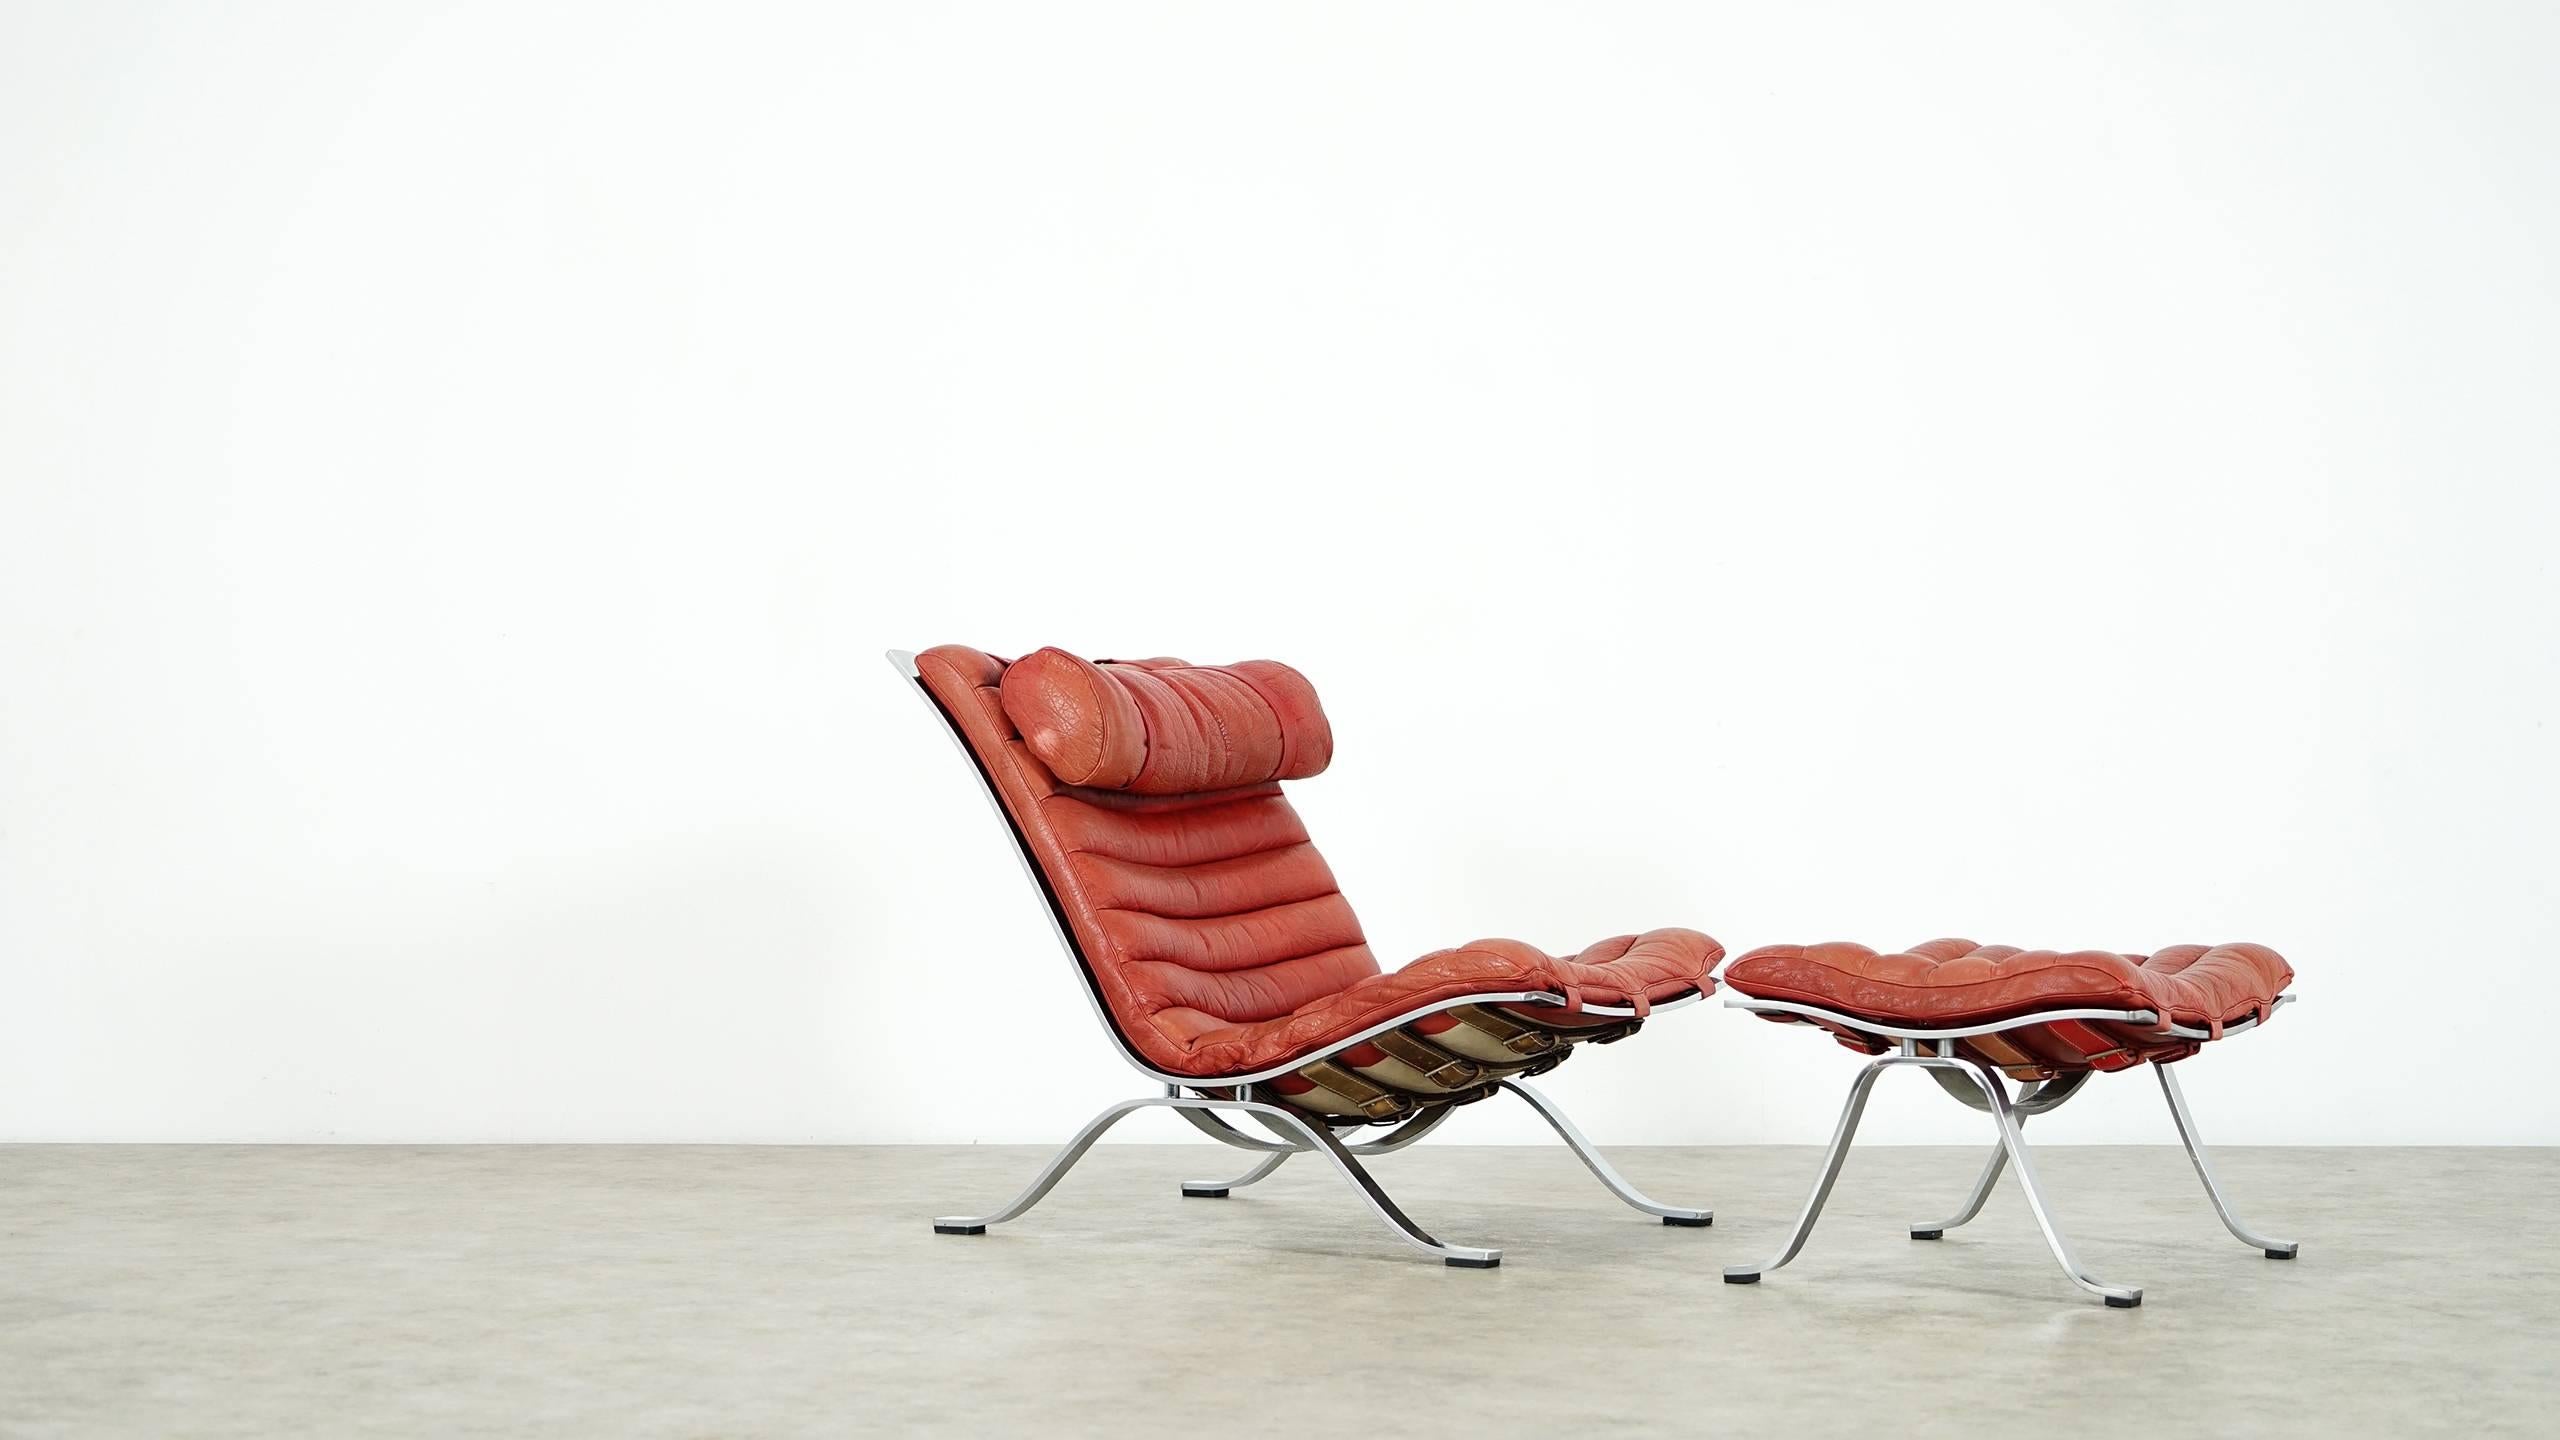 Fantastic comfortable lounge chair with its footstool...

Designed by Arne Norell for Norell Möbel, Aneby Sweden 1966.

This award winning lounge chair was made of high quality flat chrome plated steel and has very thick red or orange buffalo